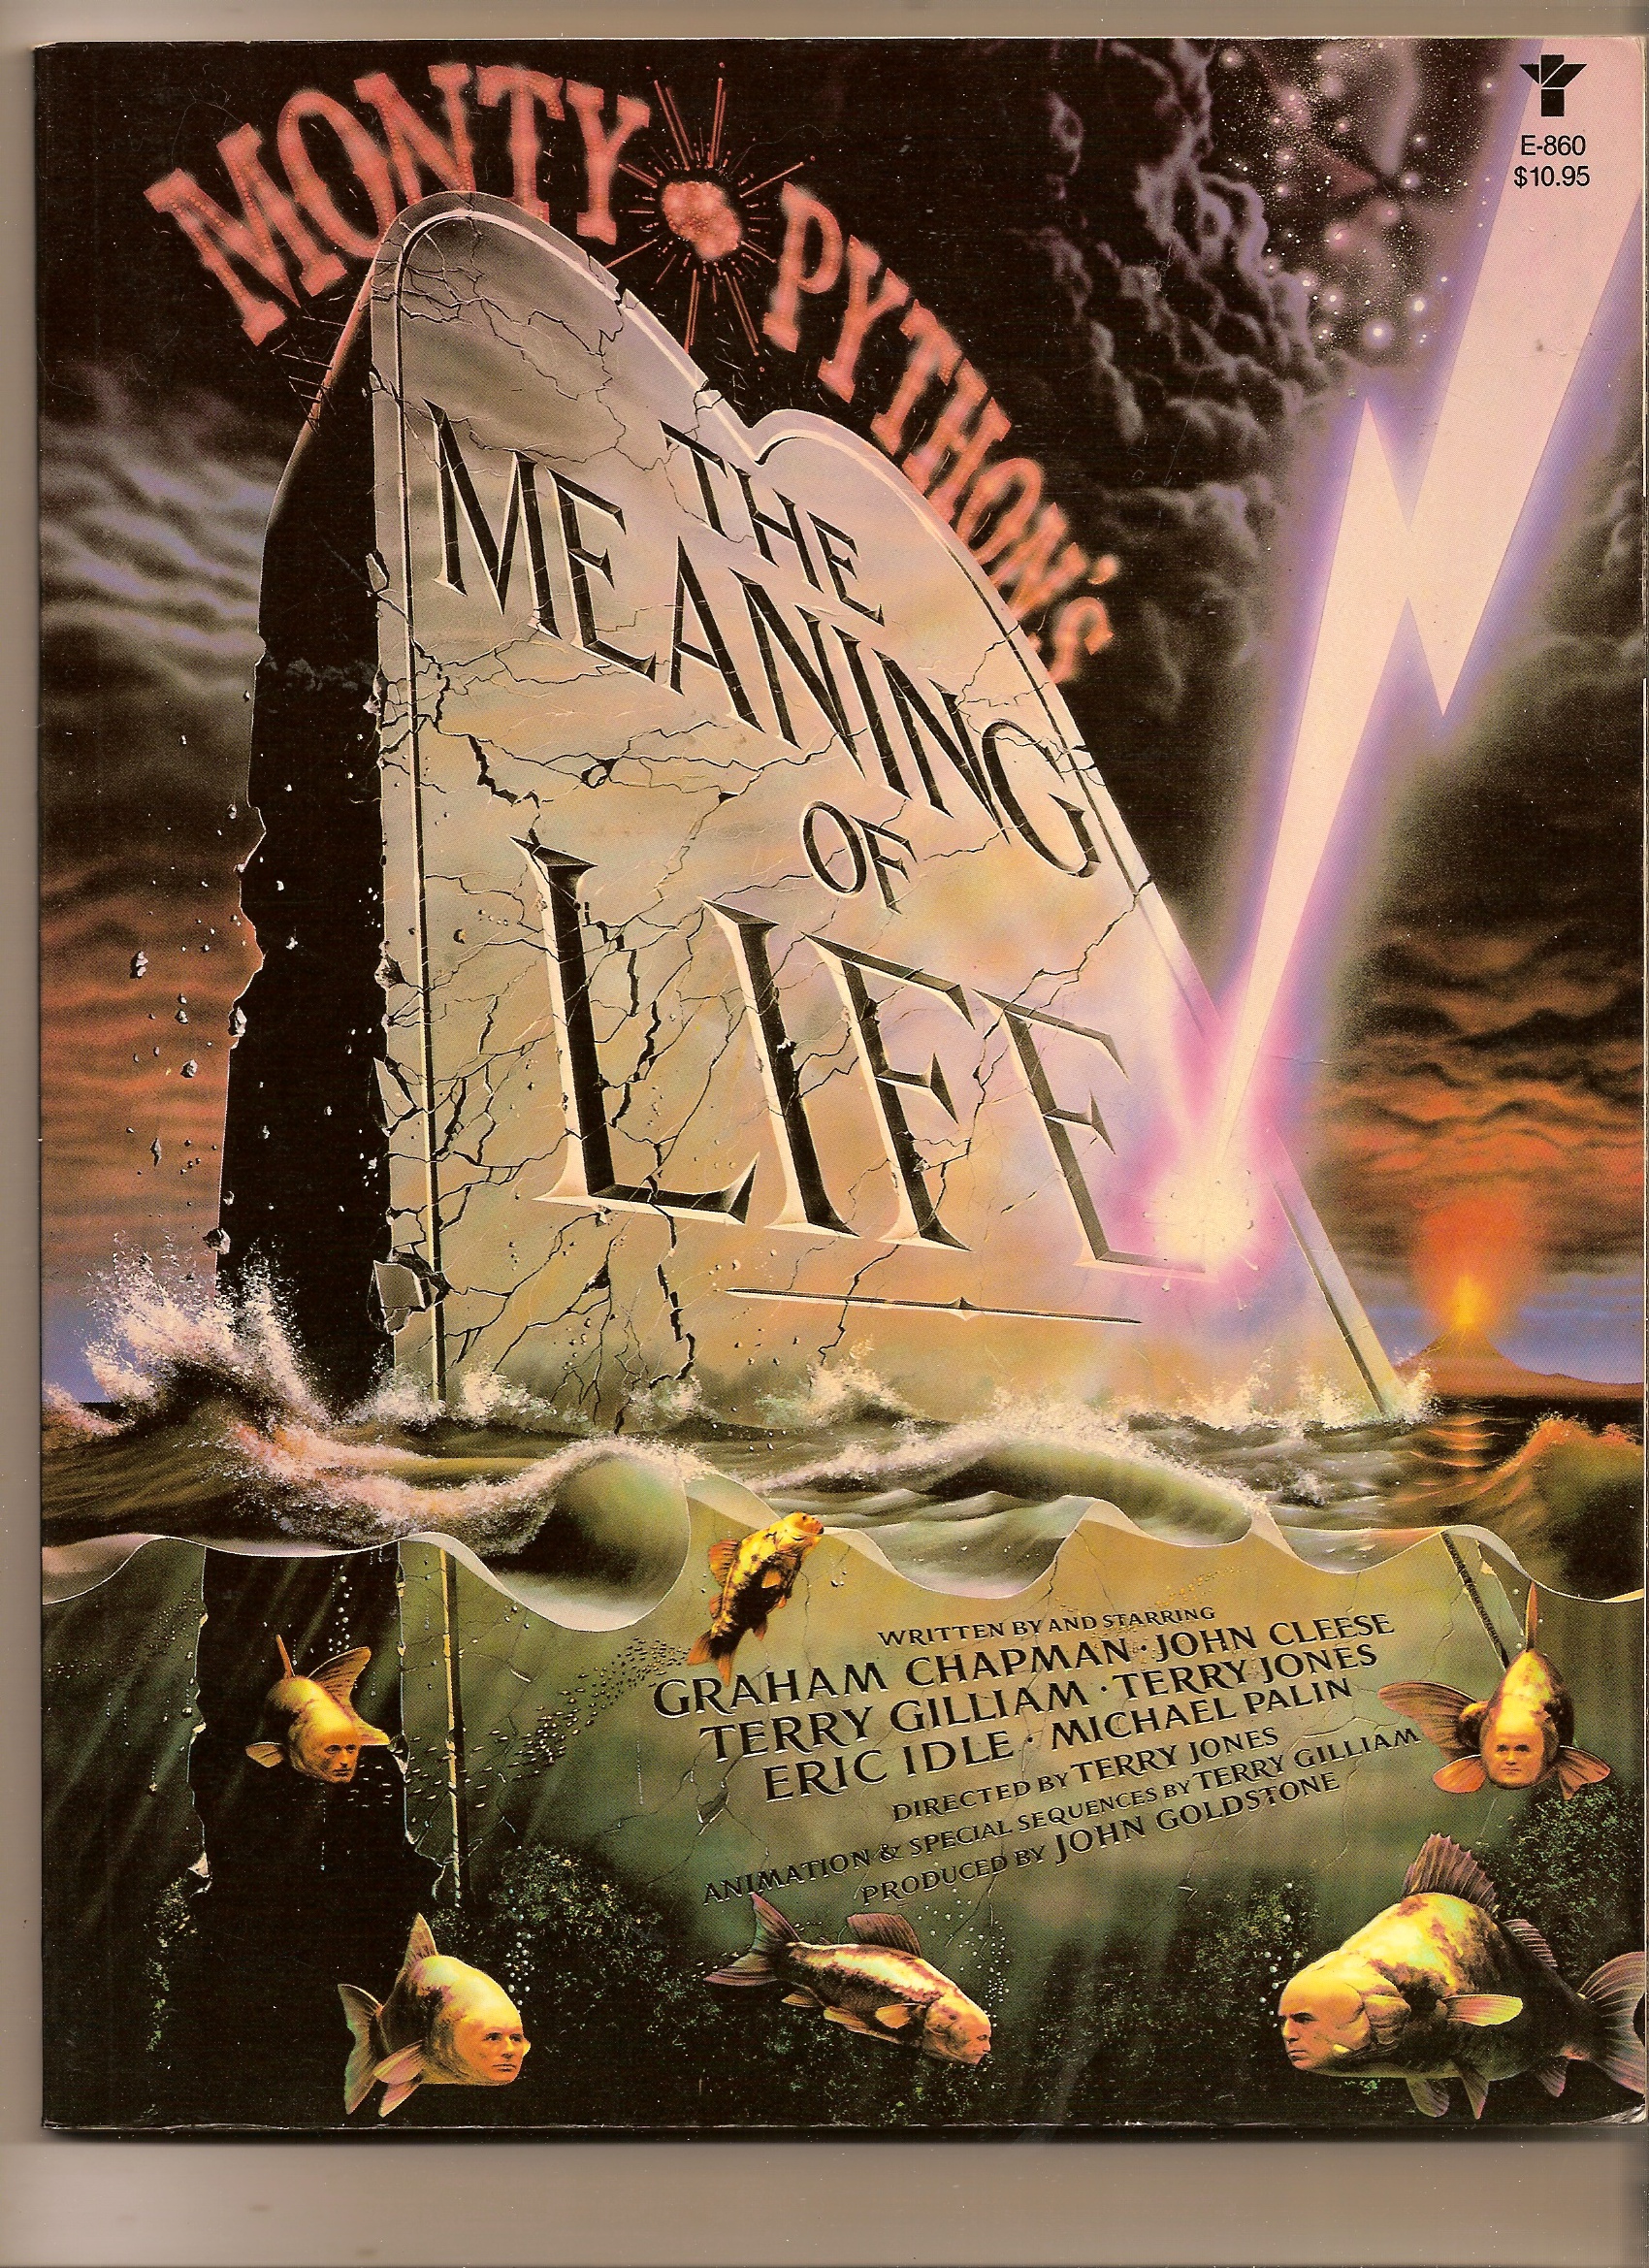 CHAPMAN GRAHAM, JOHN CLEESE, TERRY GILLIAM - Monty Python's the Meaning of Life